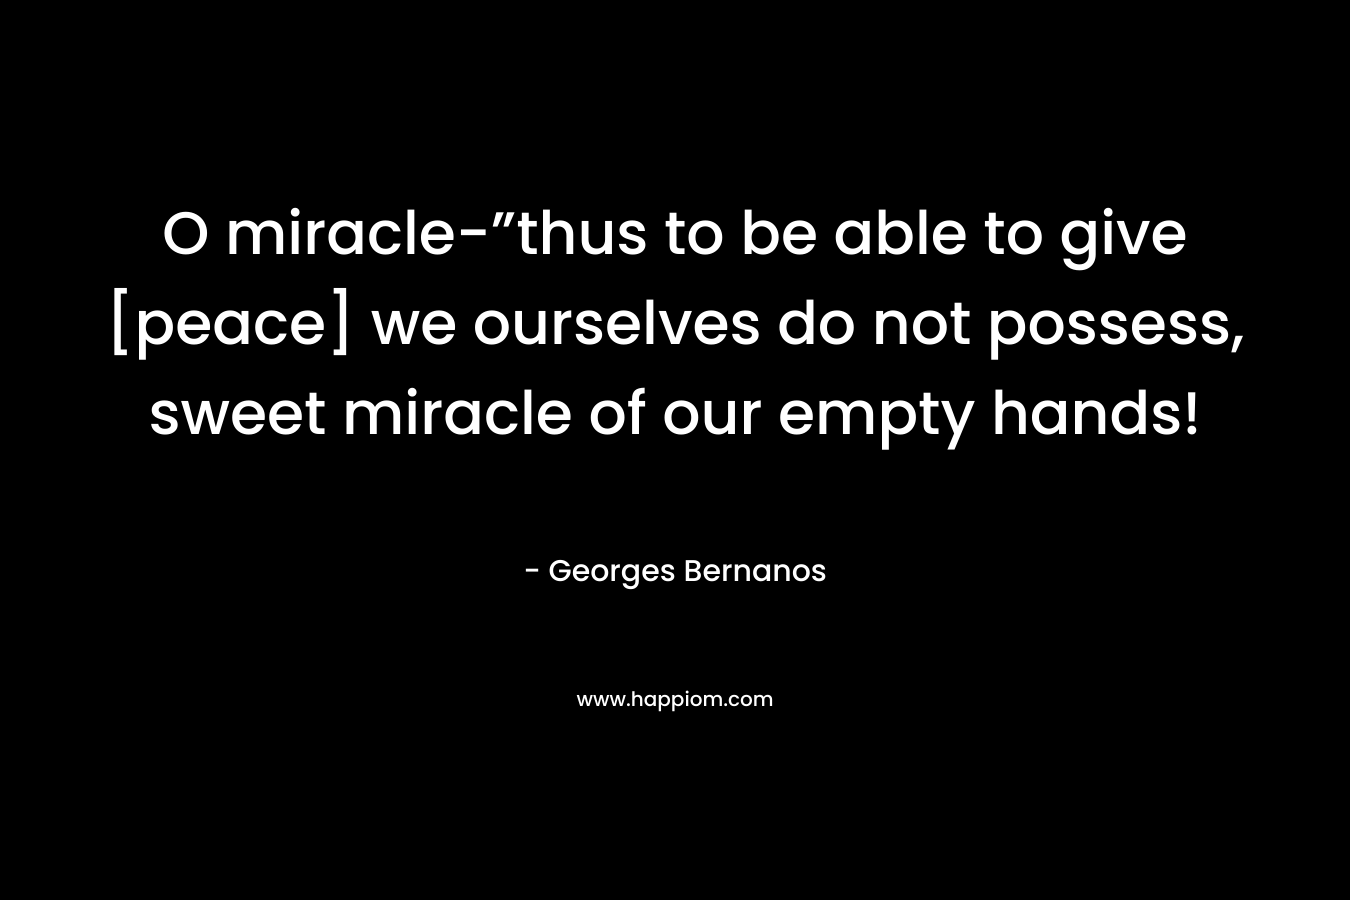 O miracle-”thus to be able to give [peace] we ourselves do not possess, sweet miracle of our empty hands! – Georges Bernanos